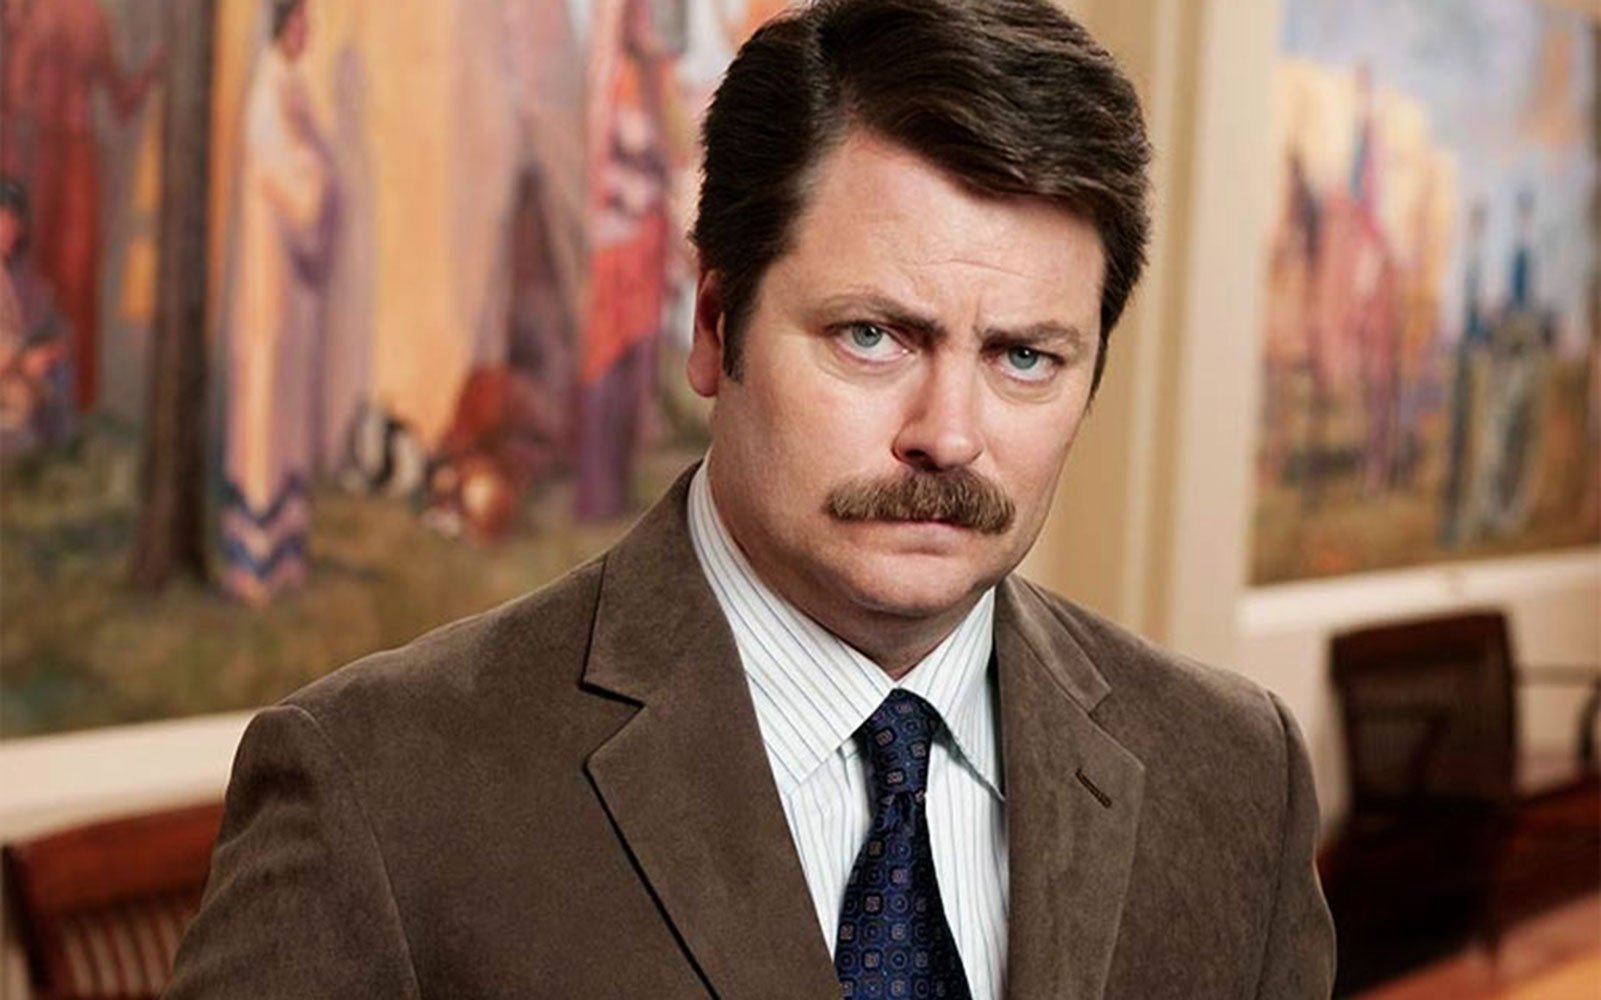 All Rise for Nick Offerman